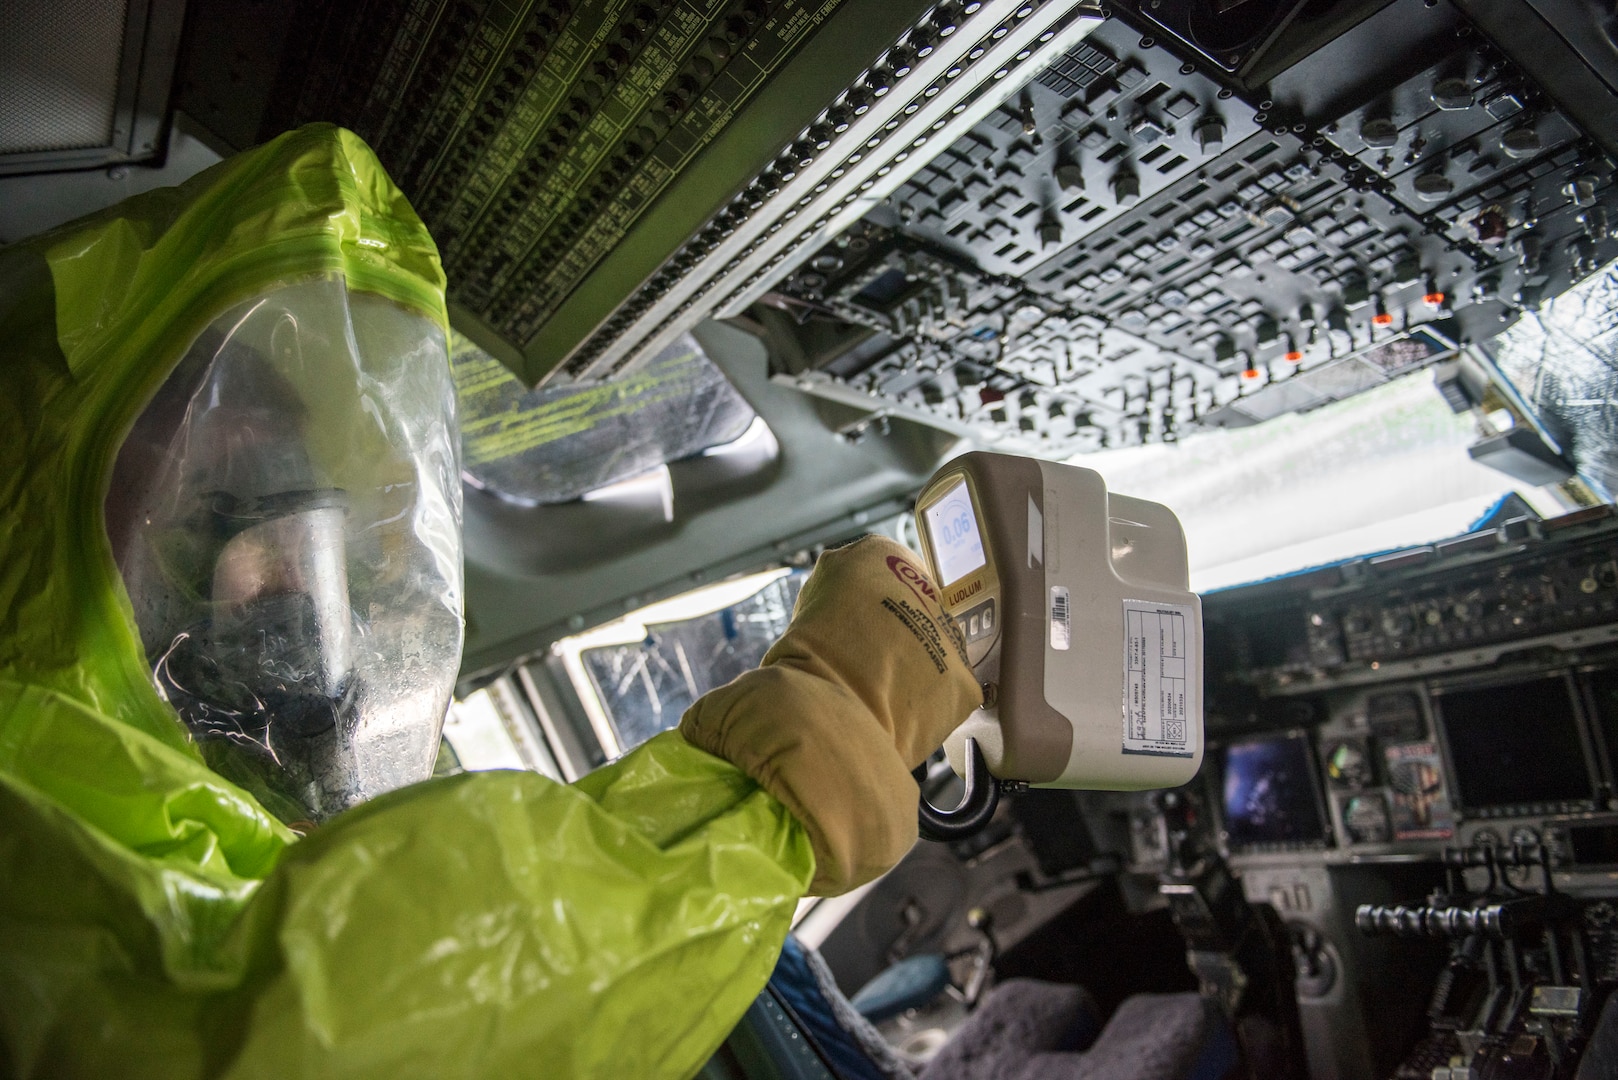 U.S. Air Force Staff Sgt. Austin Lloyd, 167th Airlift Wing firefighter, uses a gamma detector in the cockpit of a C-17 Globemaster III aircraft, during a Counter CBRN (Chemical, Biological, Radiological, and Nuclear) All-Hazard Management Response, or CAMR, exercise at the 167th AW, Martinsburg, West Virginia, April 30, 2021. CAMR is a hybrid program of classroom lecture, discussion and tabletop exercises that culminate in a full scale emergency response exercise.